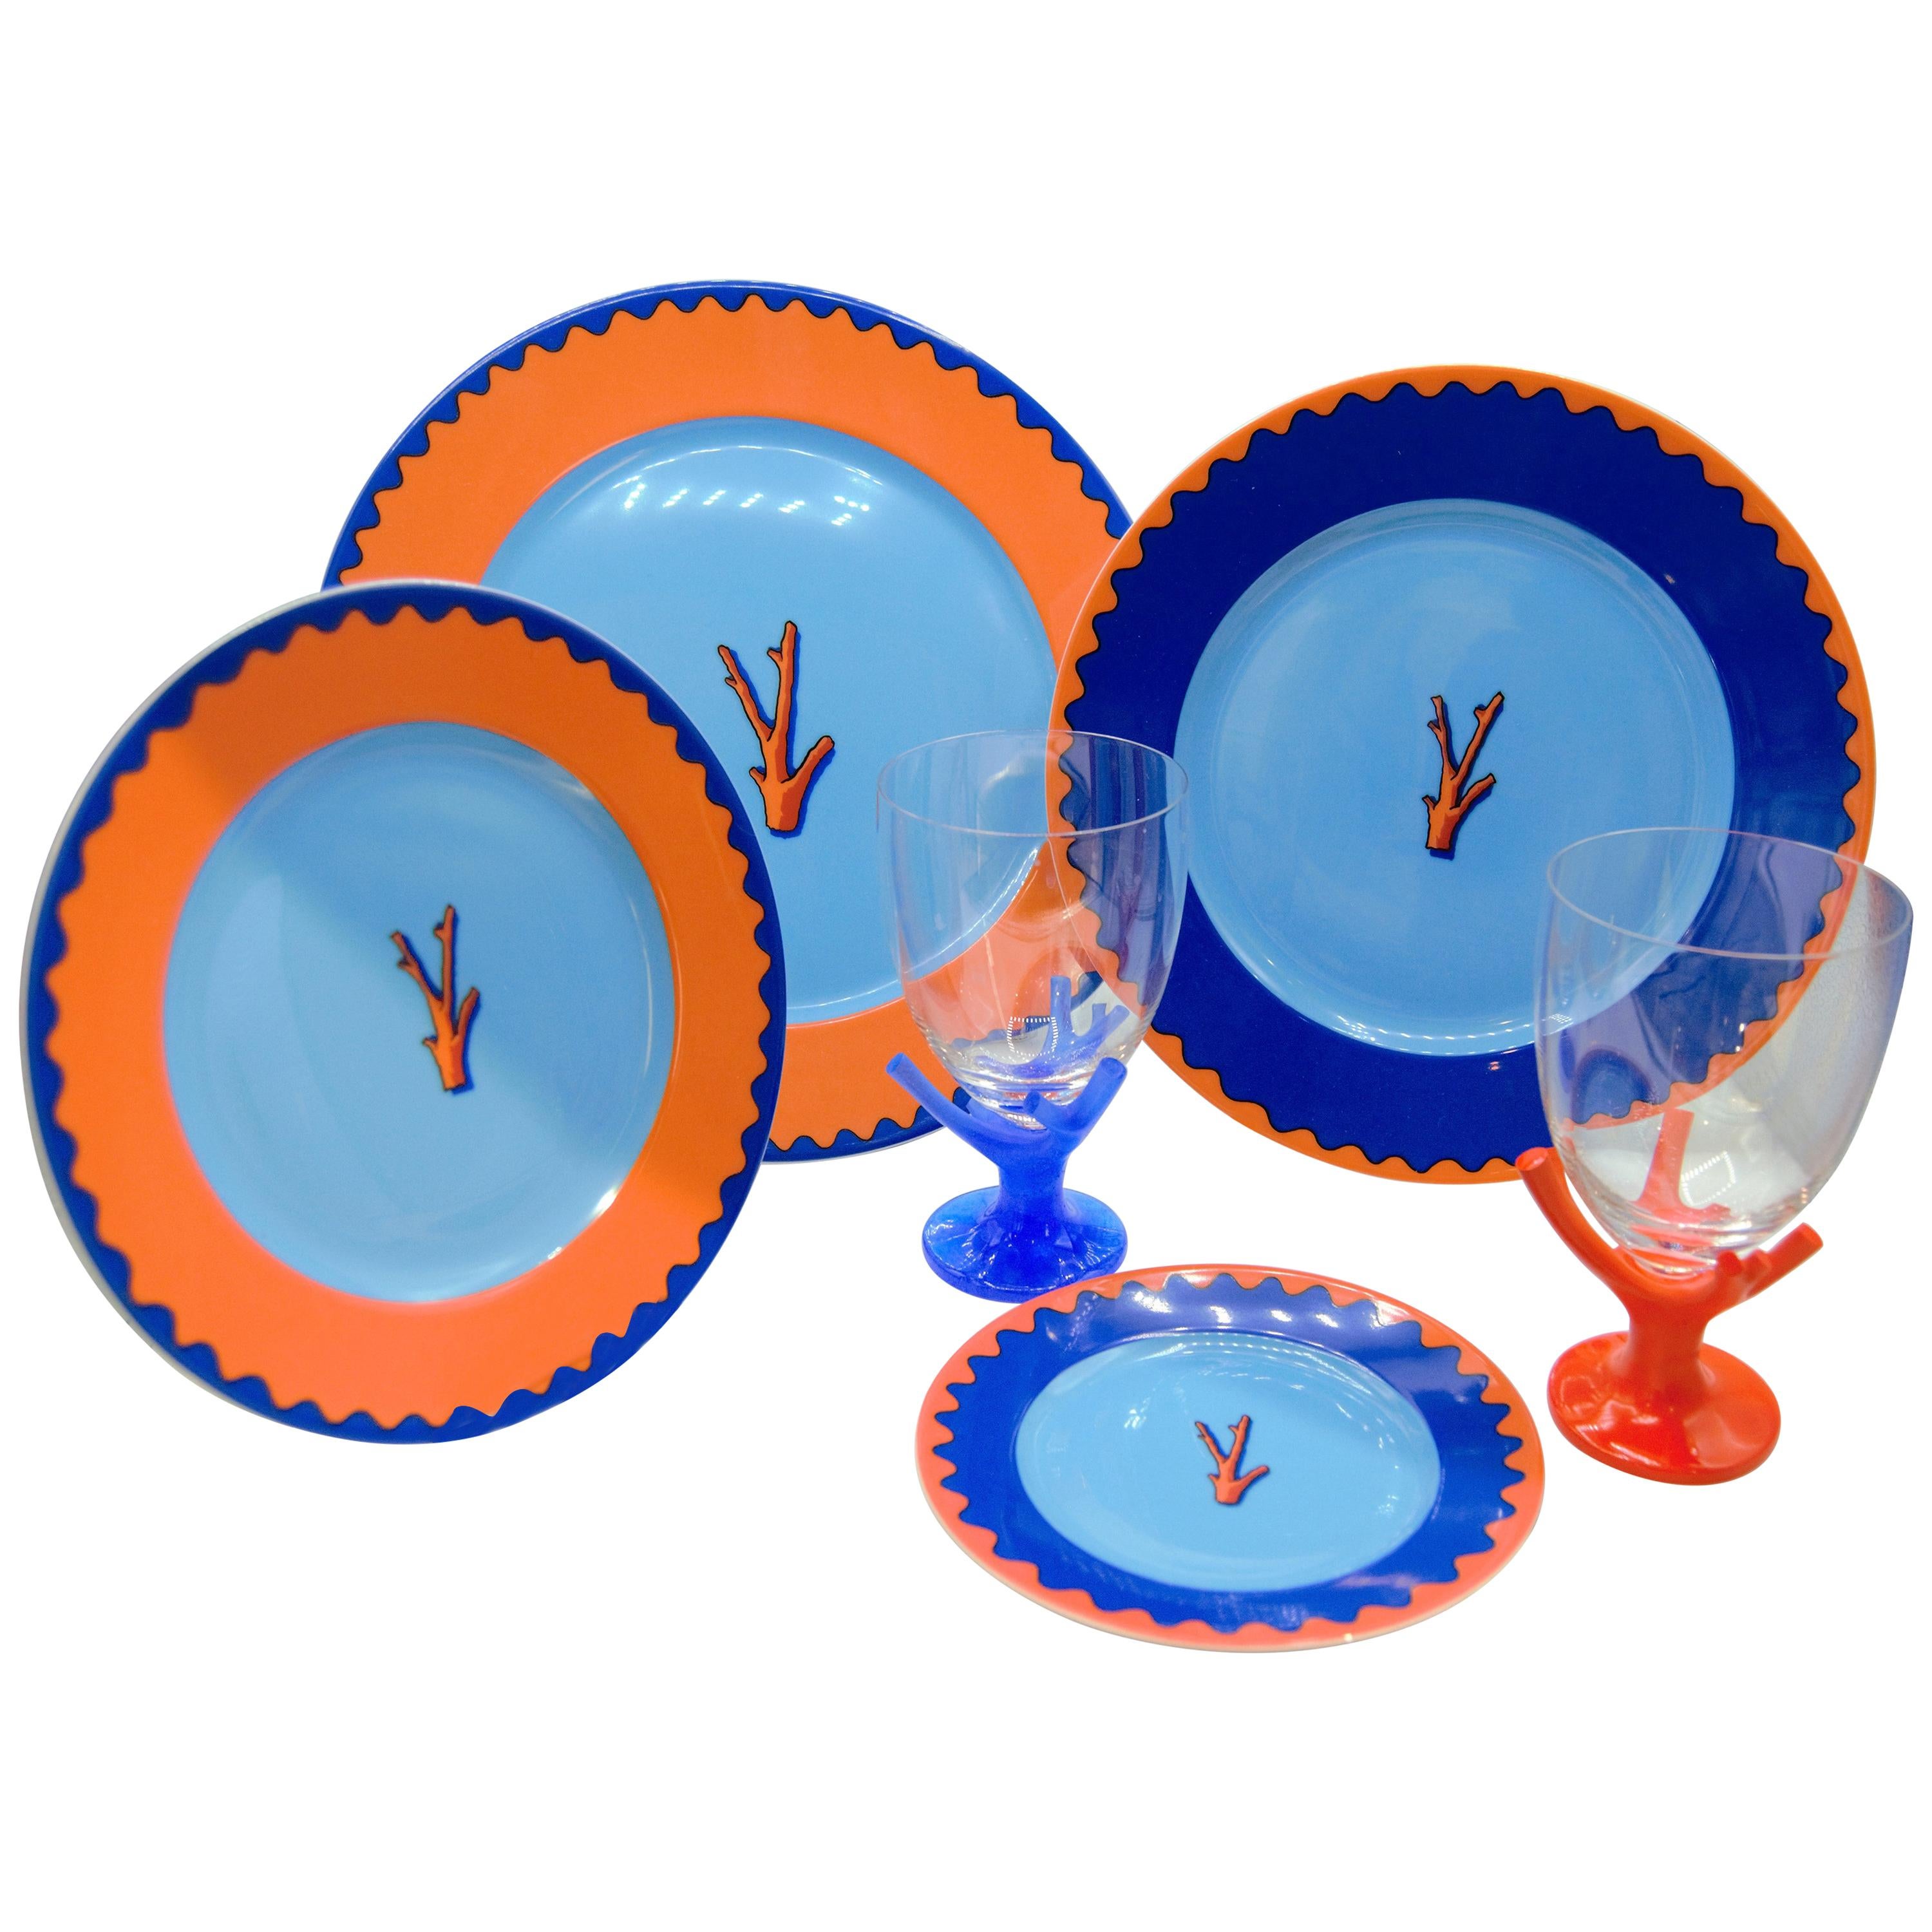 Garouste and Bonetti, by Daum - Limoges
Porcelain plate with dark and light blue with stunning orange border (vice versa according to the plate). Coral motive.

Available:

20 table plates / assiettes de table: 26 cm - 10.24 in
16 dessert-entremet